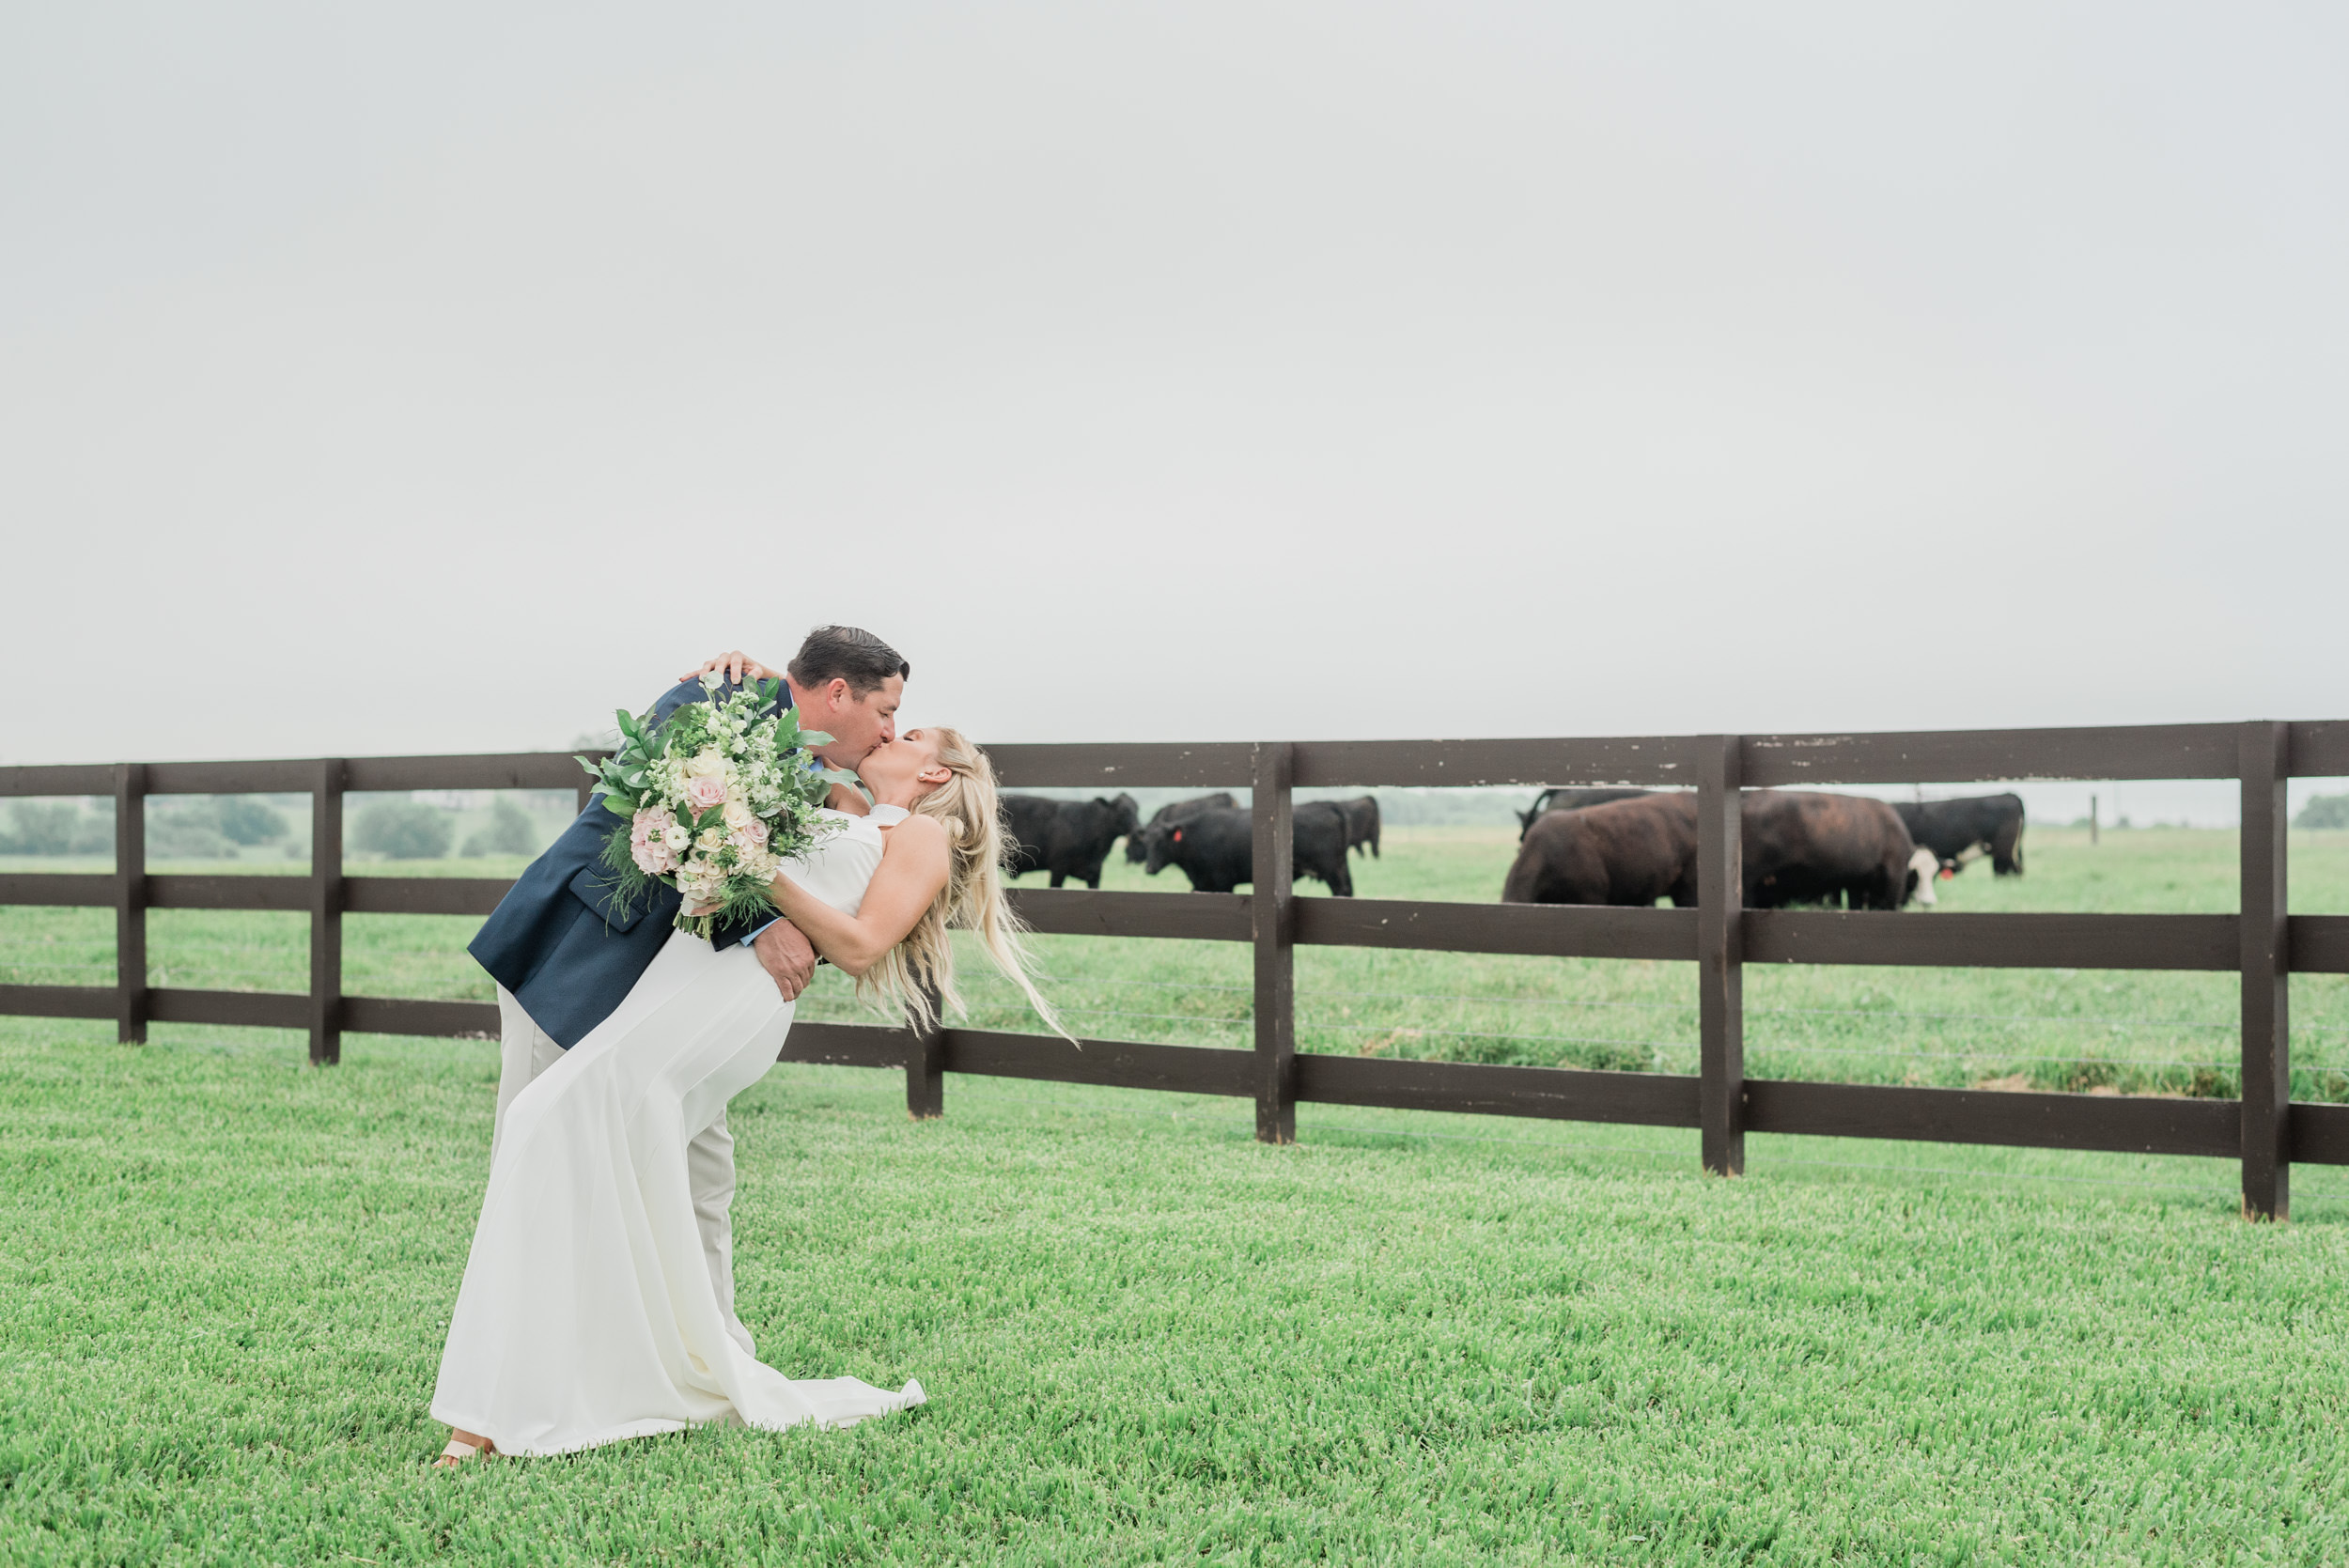 groom dipping and kissing bride in front of farm fence with black cows in background